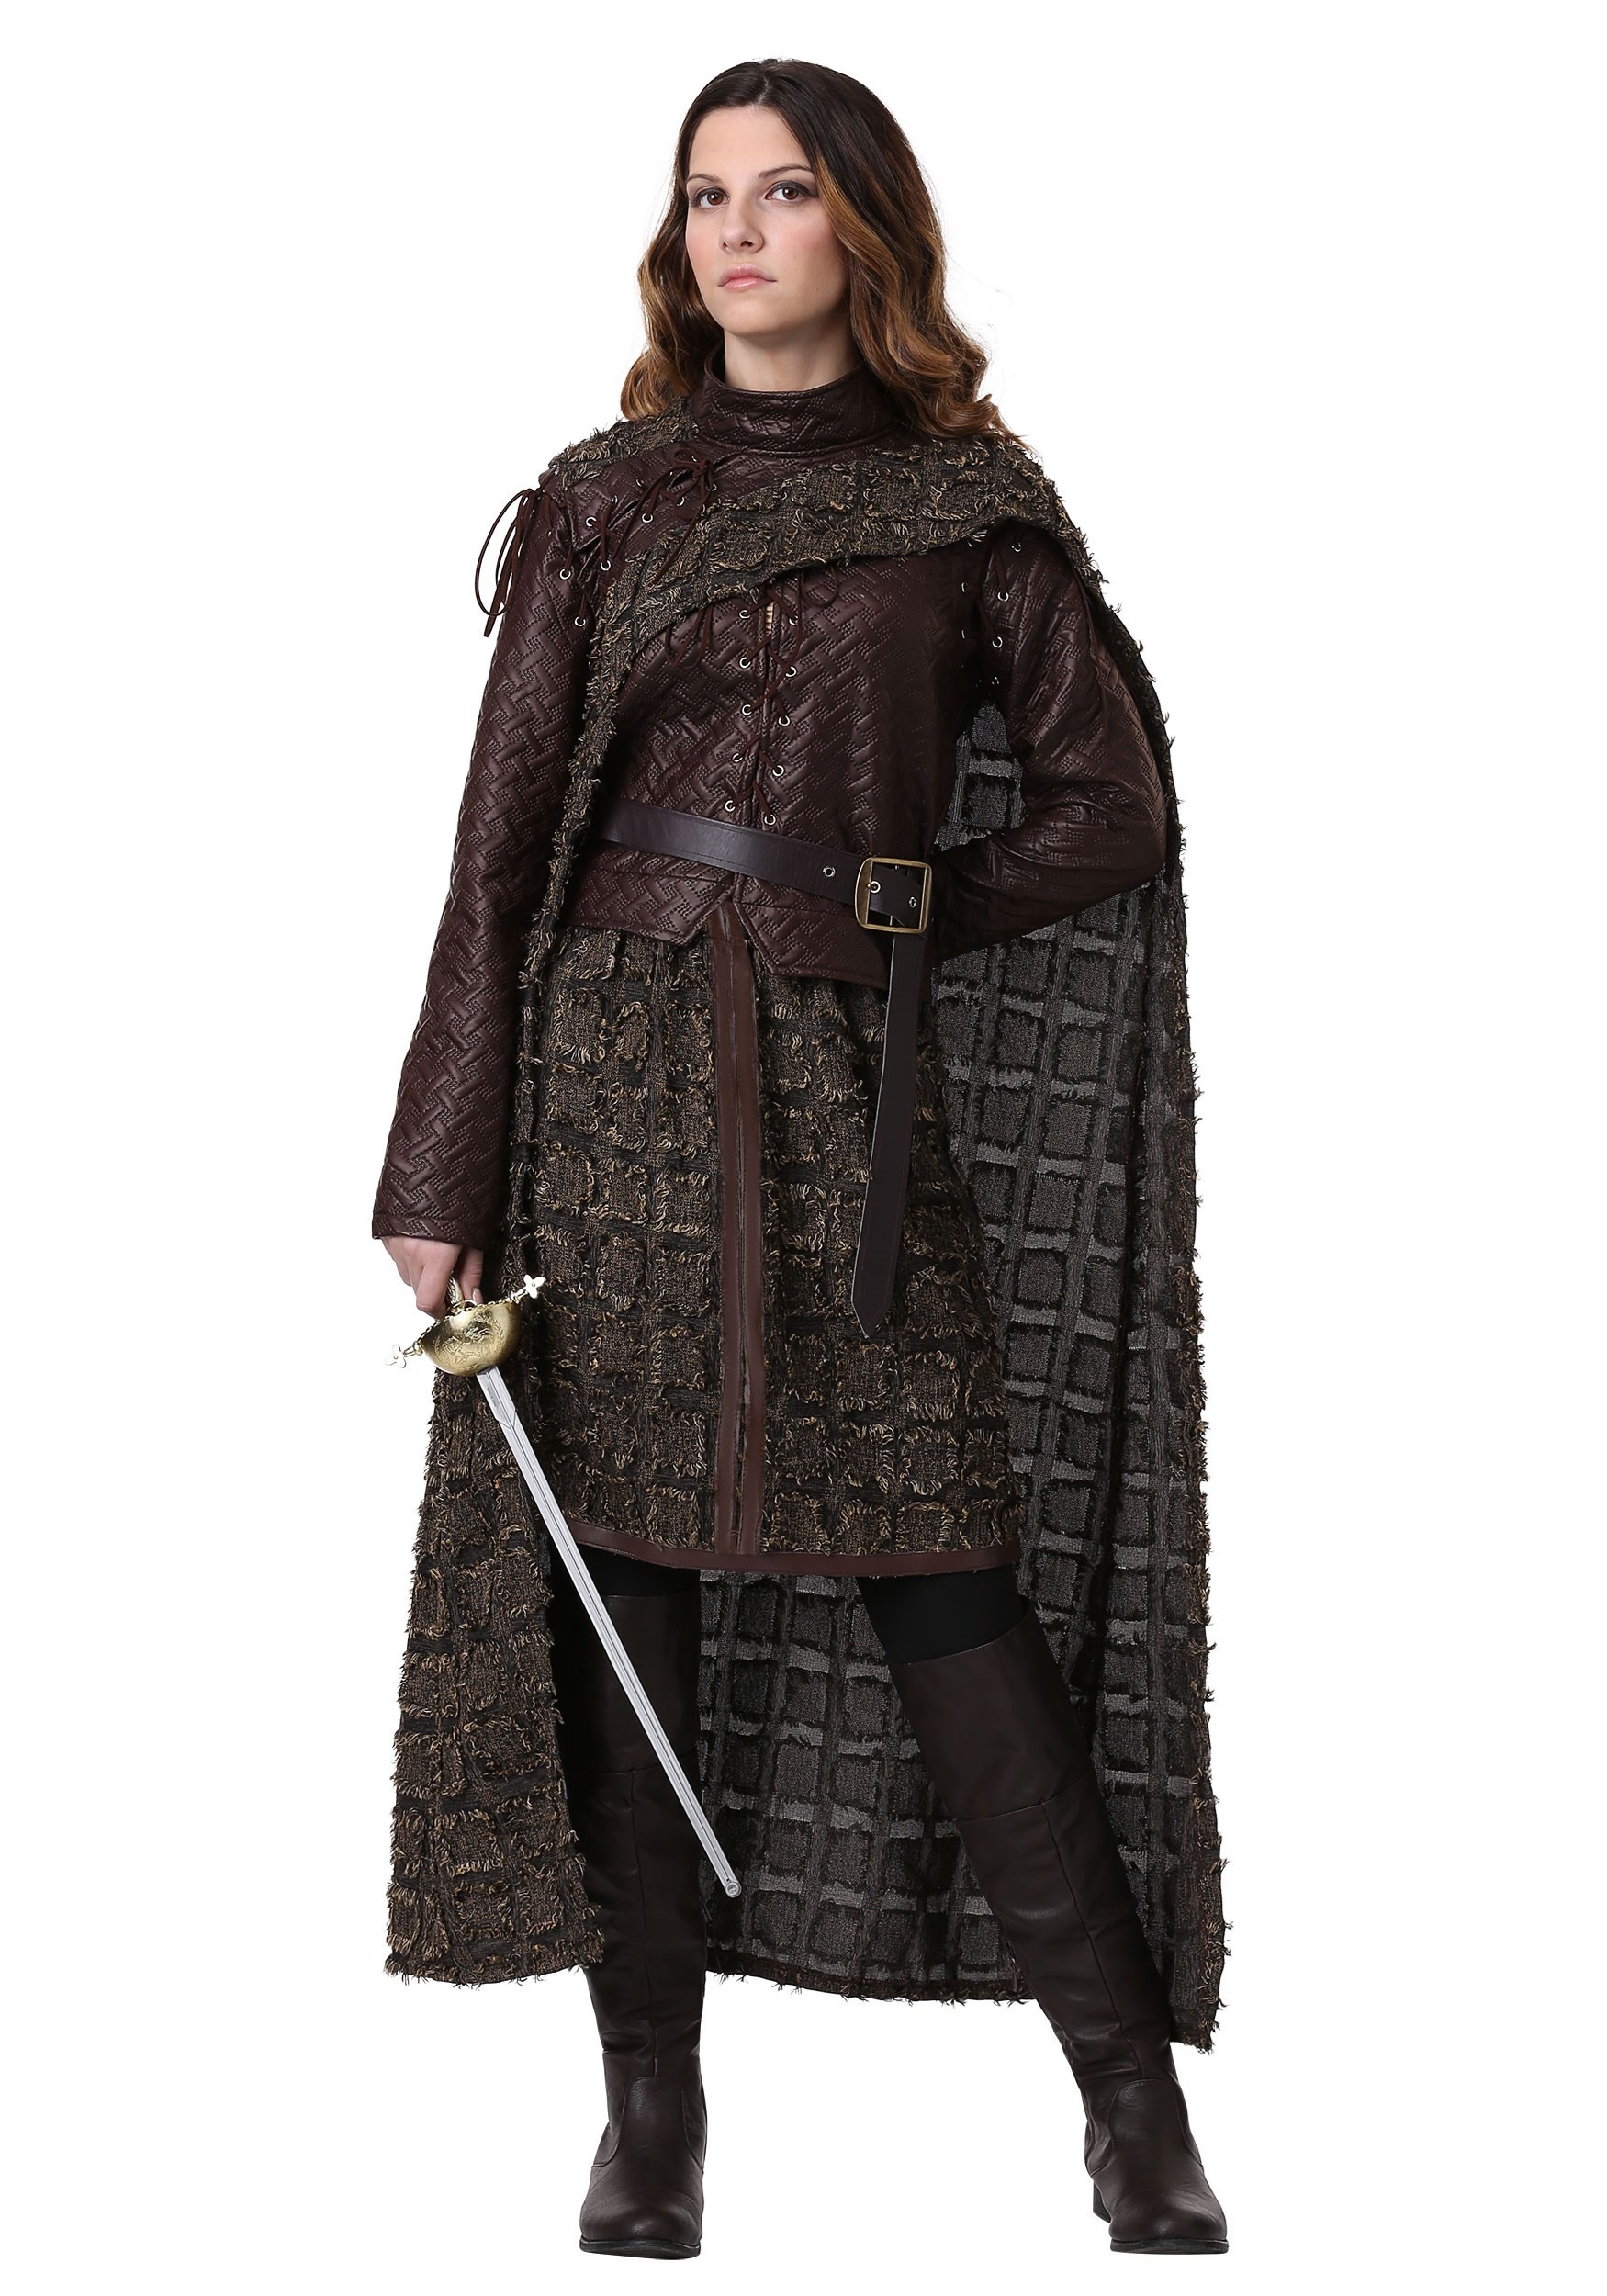 Image of Plus Size Winter Warrior Costume for Women ID FUN6363PL-3X